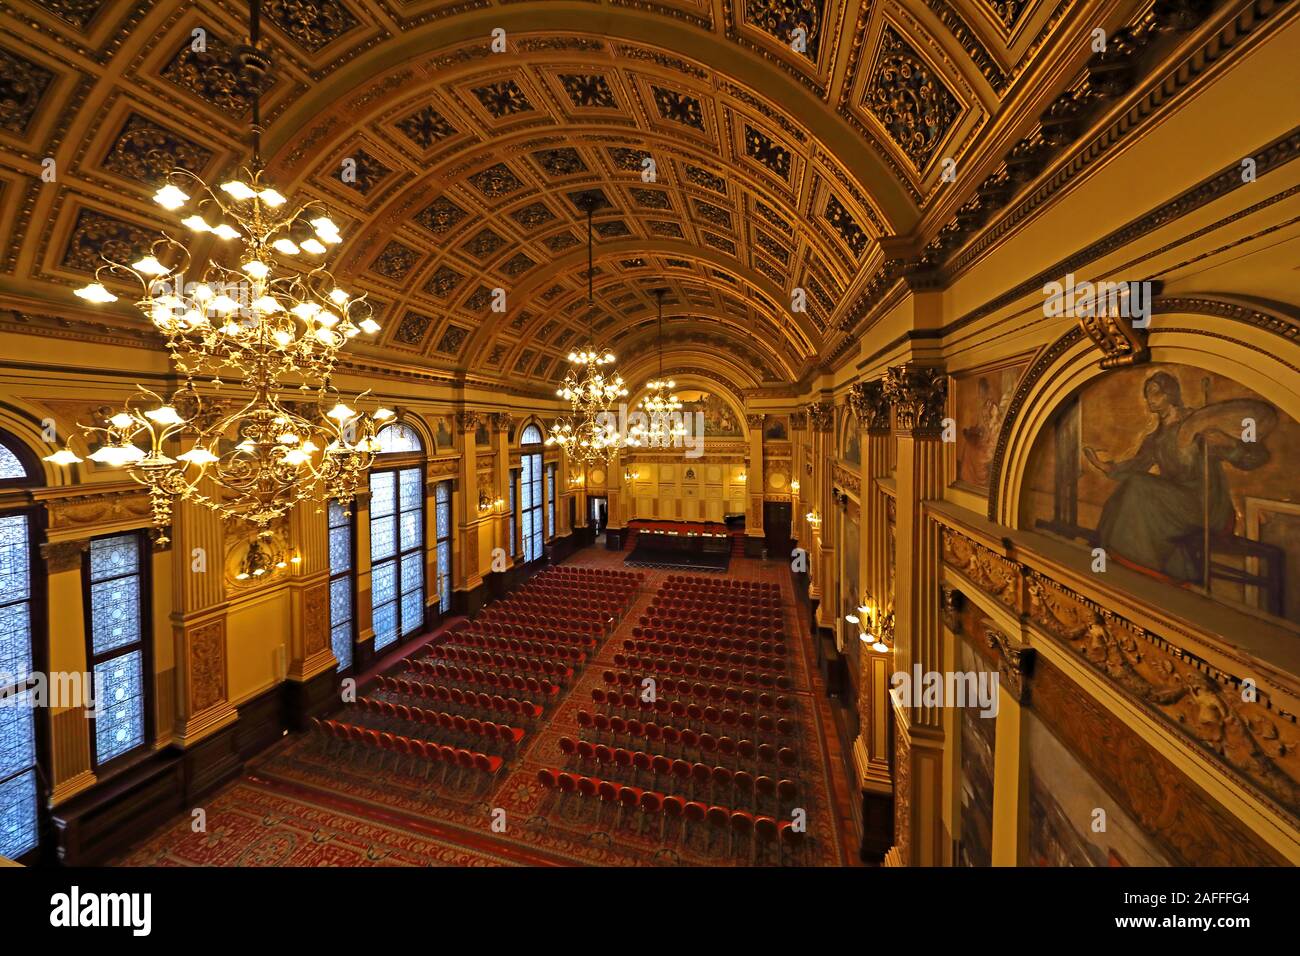 The Banqueting Hall,Glasgow City Chambers,town hall,George Square,Strathclyde,Scotland,UK, G2 1DU Stock Photo